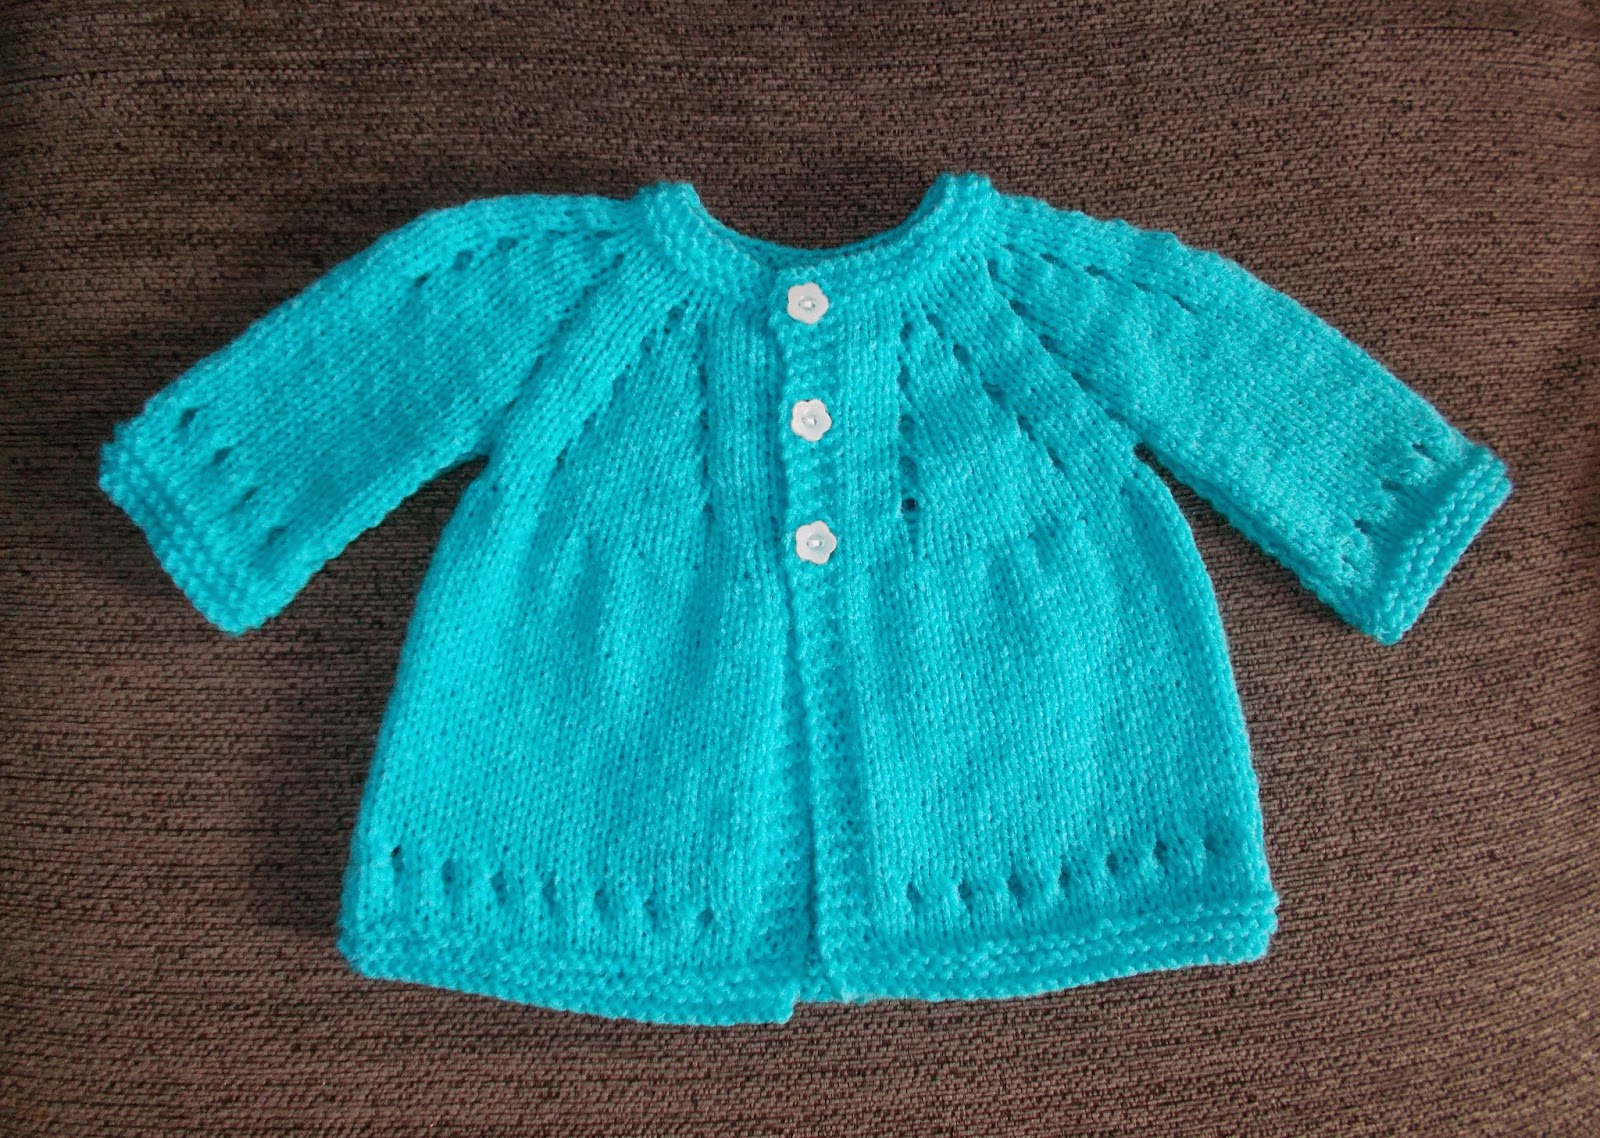 How To Knit A Top-down Cardigan For A Child?